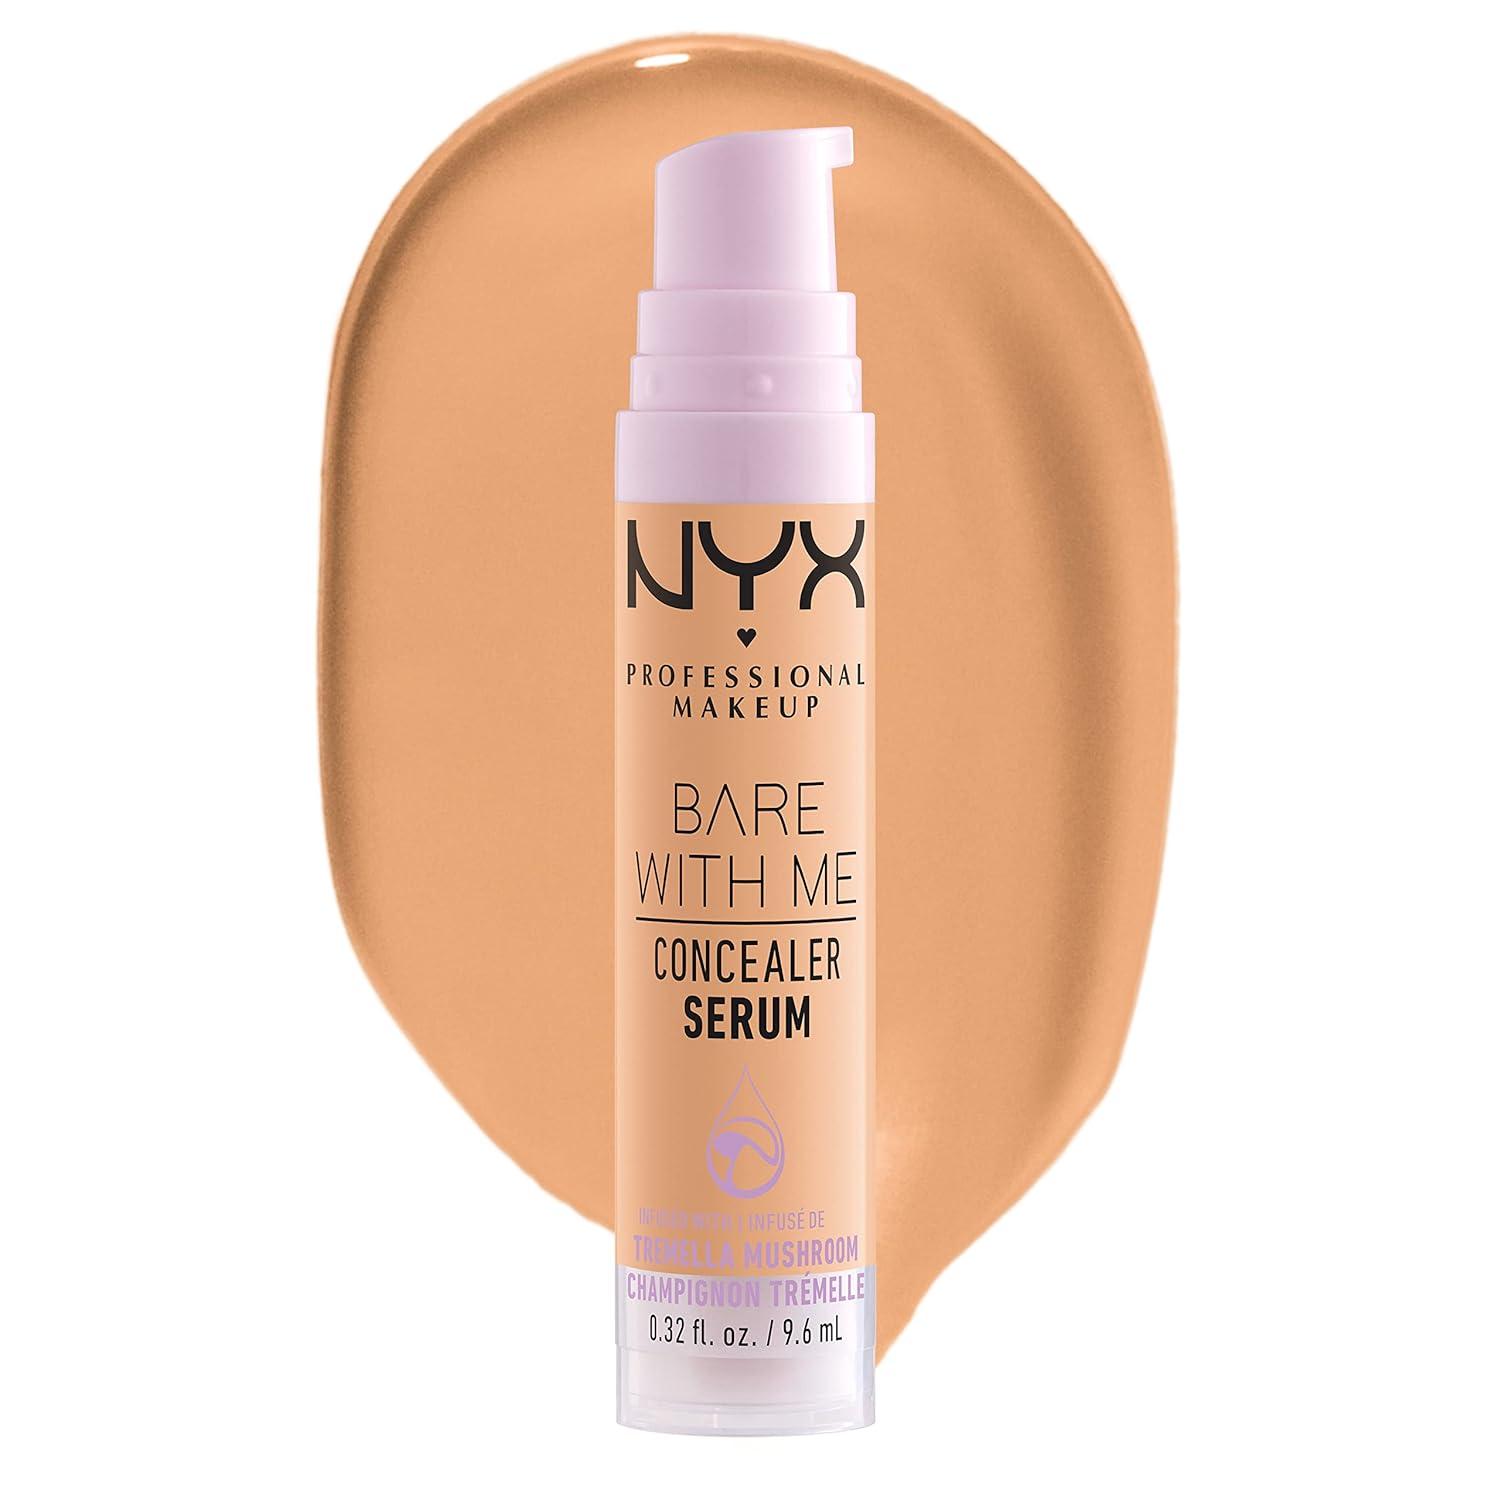 Nyx Professional Makeup Bare with Me Concealer Serum - Tan, Retail $12.00